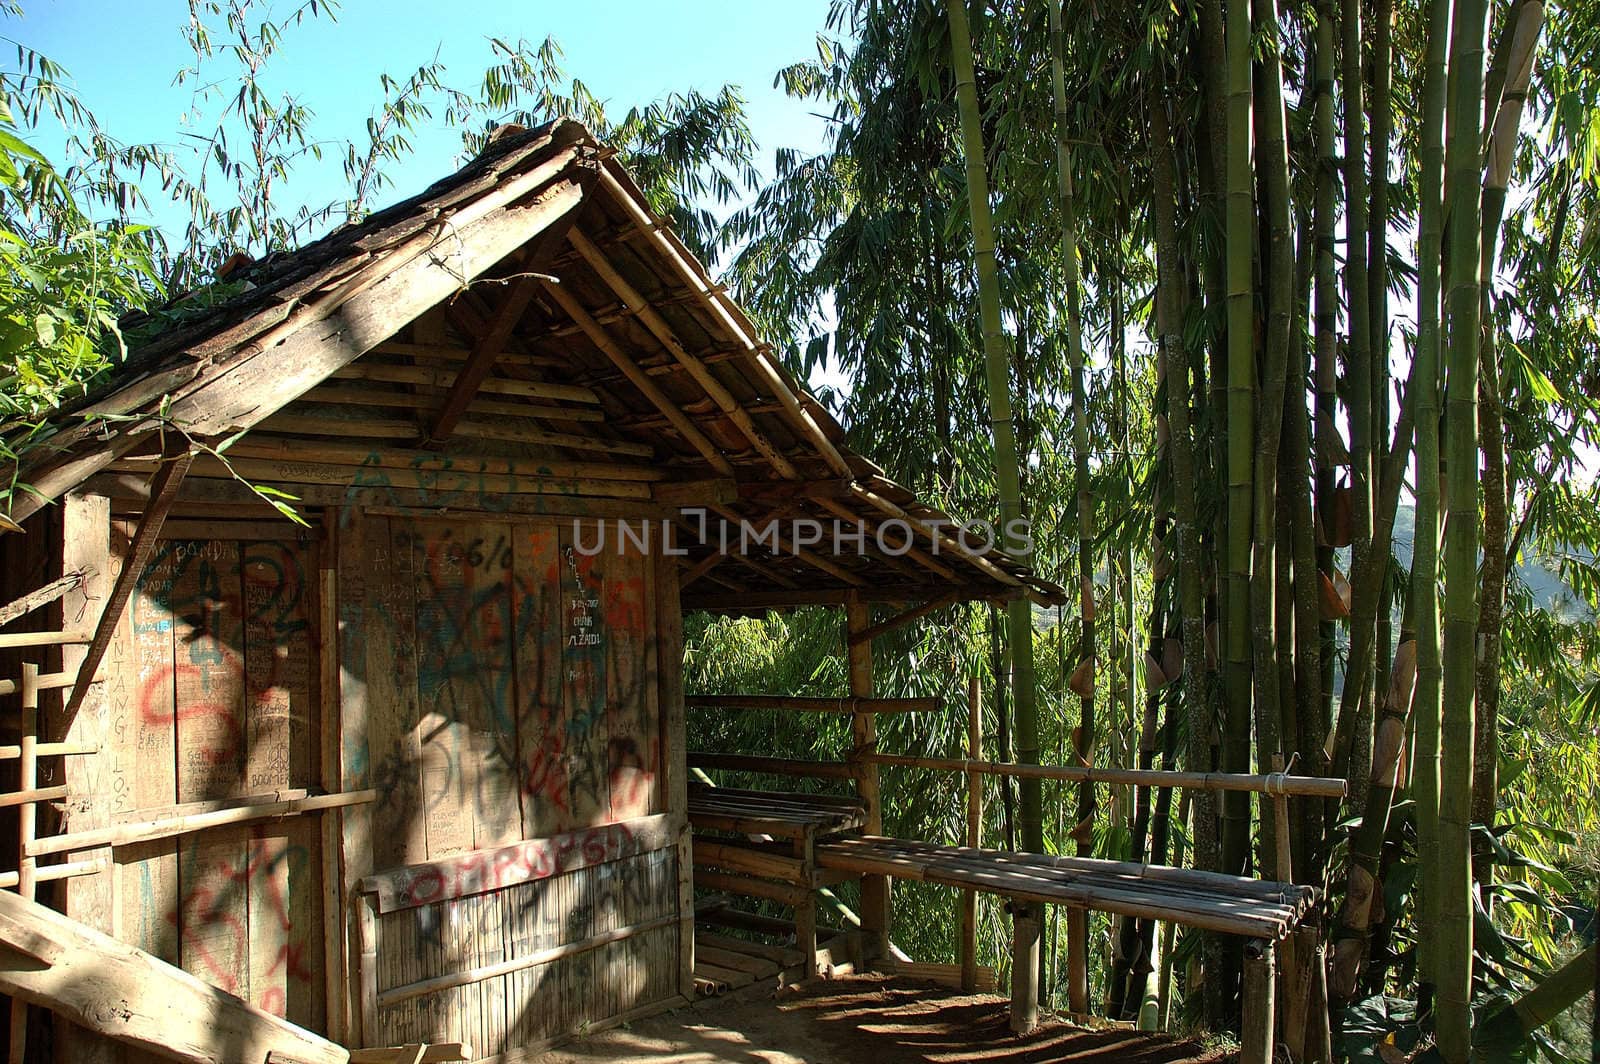 Village house - Rural sweet home with bamboo trees beside it